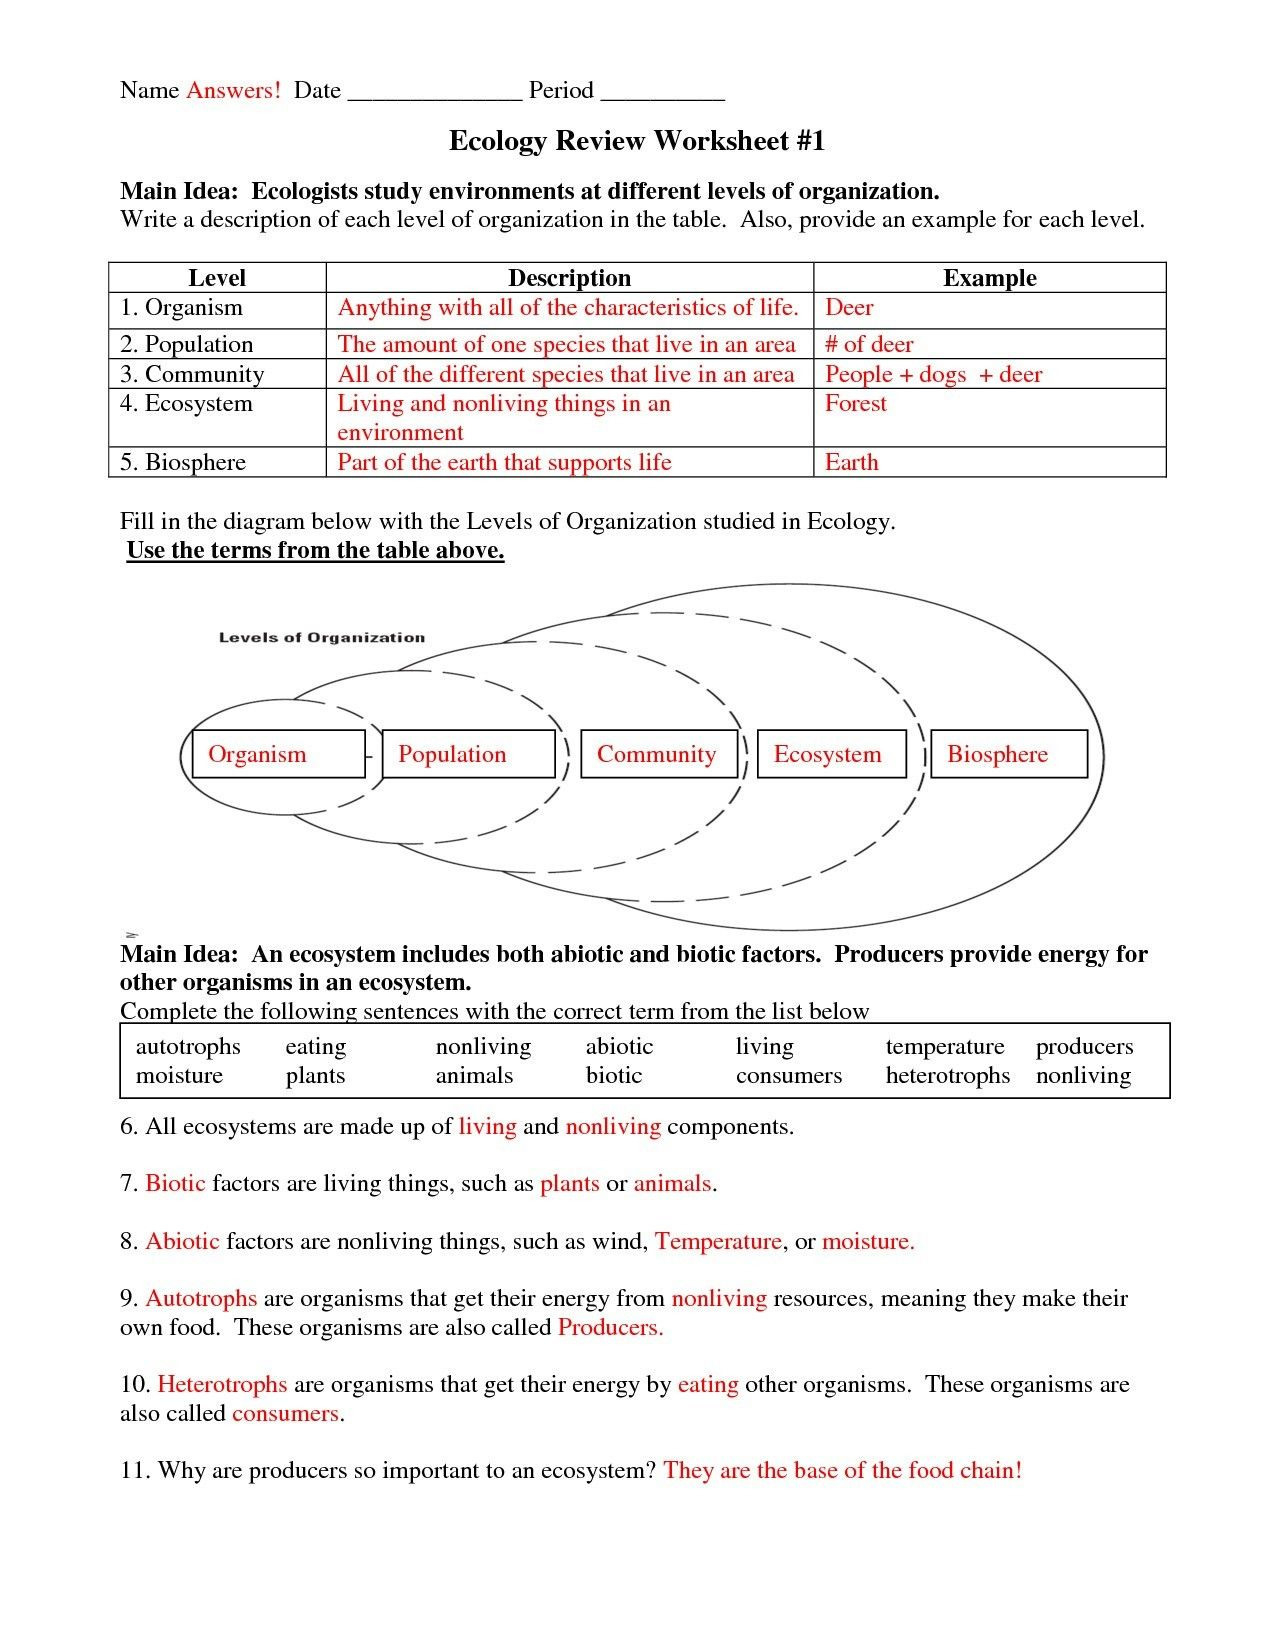 easy-teacher-worksheets-community-ecology-answer-key-6th-grade-cleo-sheets